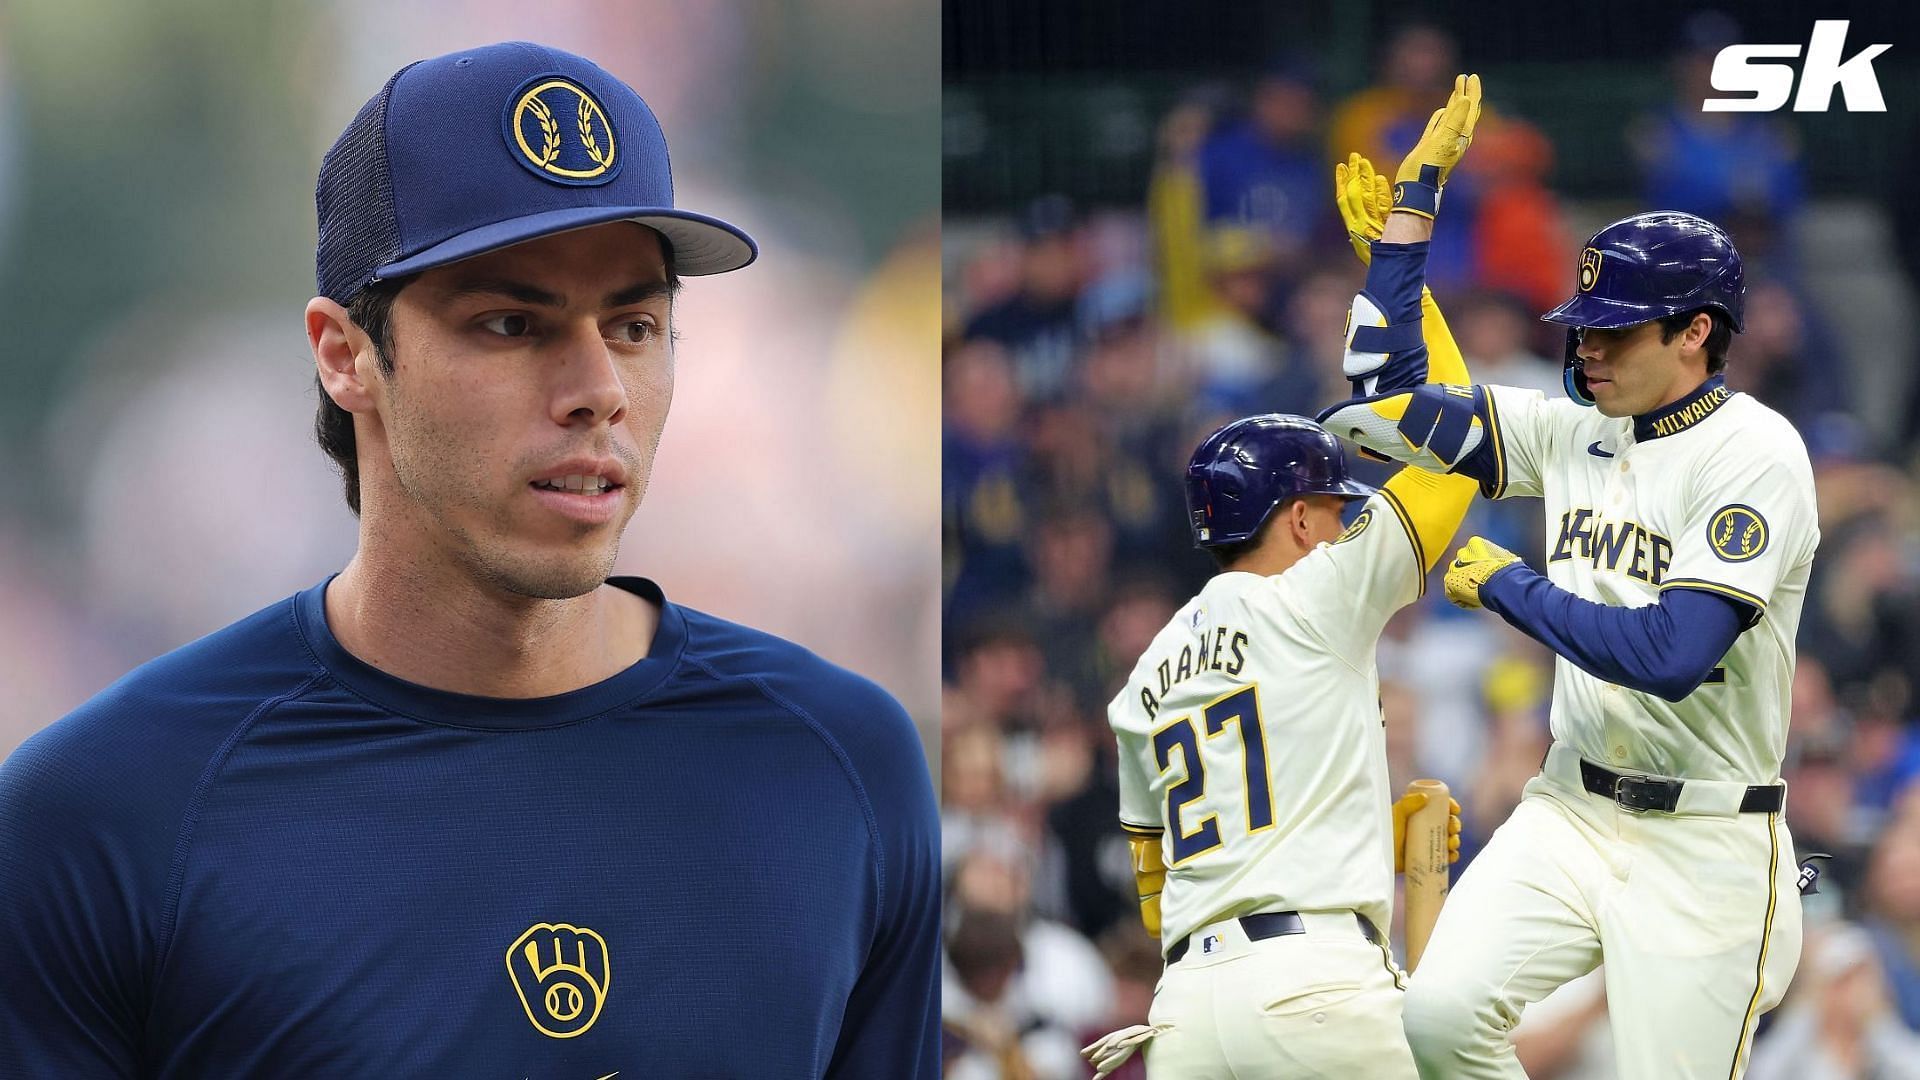 Brewers star Christian Yelich cranks second home run of the season against the Minnesota Twins